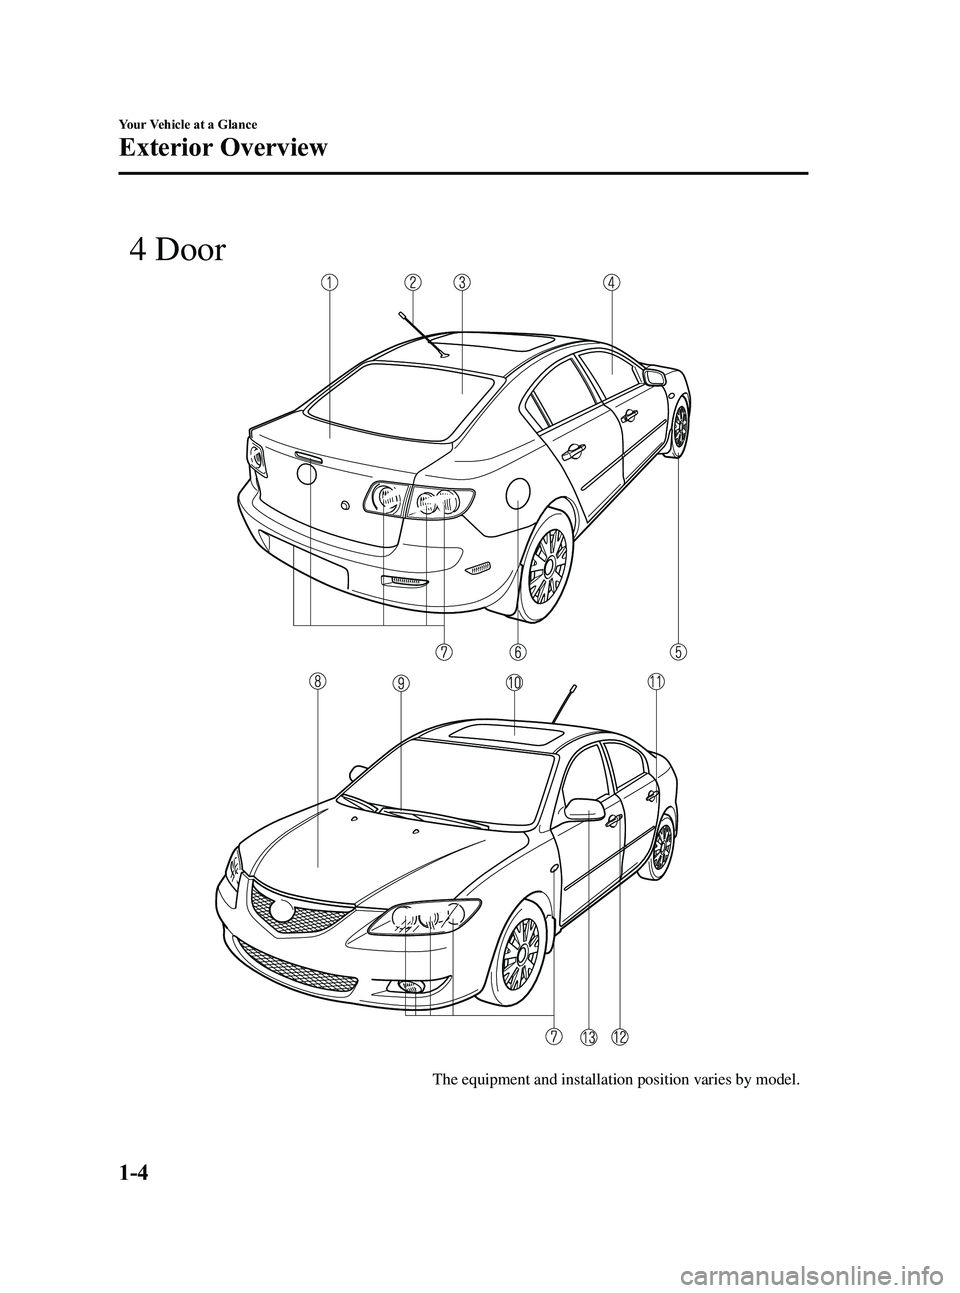 MAZDA MODEL 5 2006  Owners Manual Black plate (10,1)
The equipment and installation position varies by model.
 4 Door
1-4
Your Vehicle at a Glance
Exterior Overview
Mazda3_8U55-EA-05G_Edition3 Page10
Tuesday, September 13 2005 10:40 A